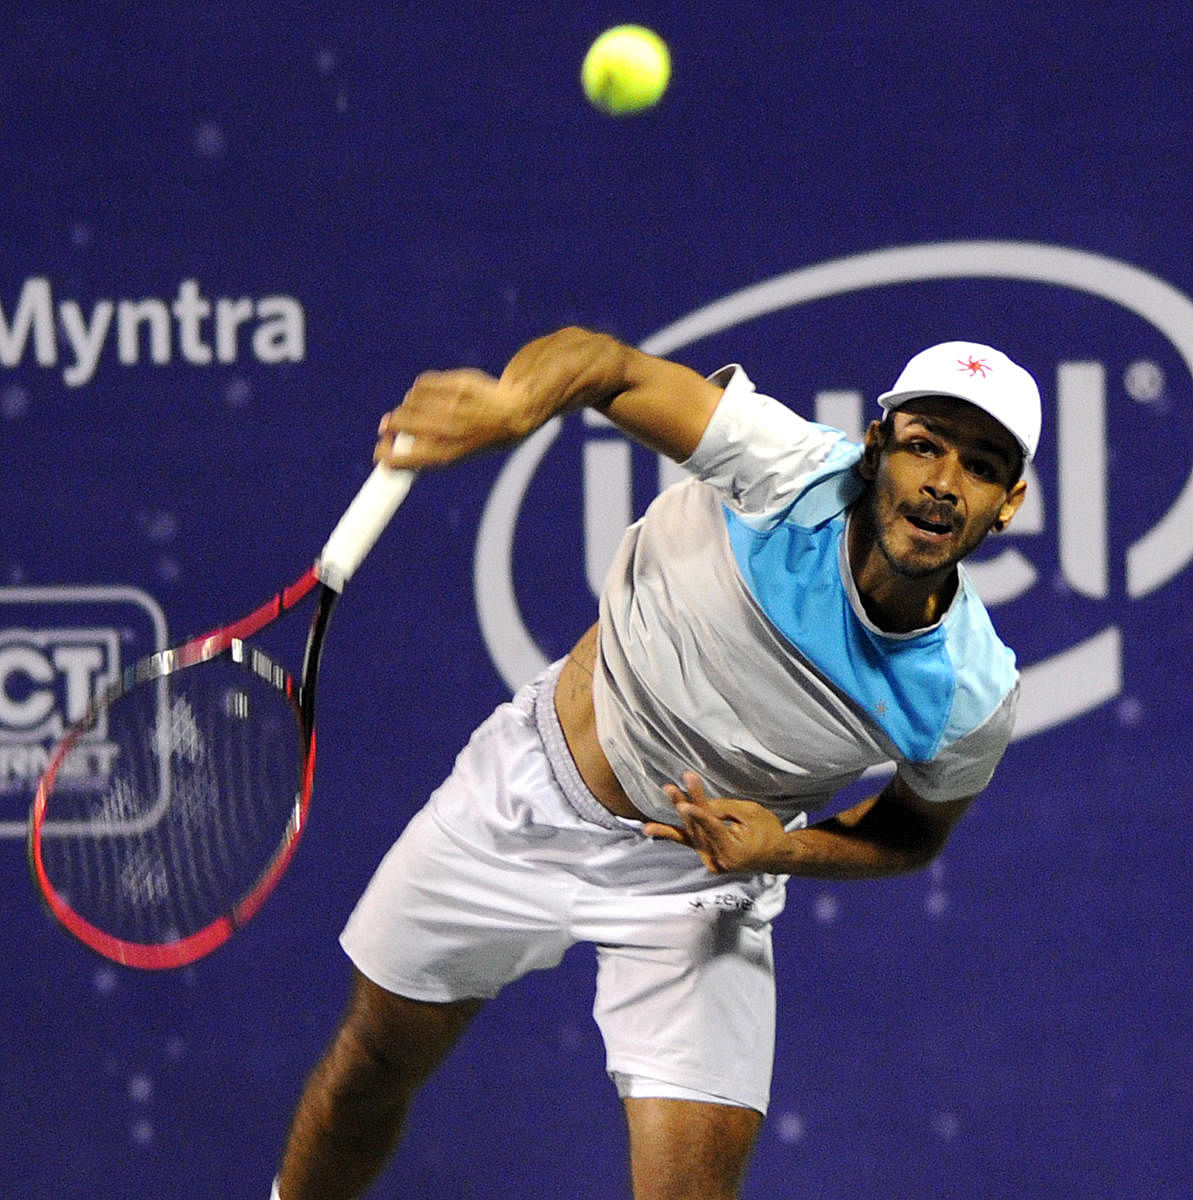 Sumit Nagal of India in action against Brydan Klein of GBR in the mens singles 2nd round of the Bengaluru Open ATP Tennis Championship at KSLTA Courts in Bengaluru on Wdnesday.